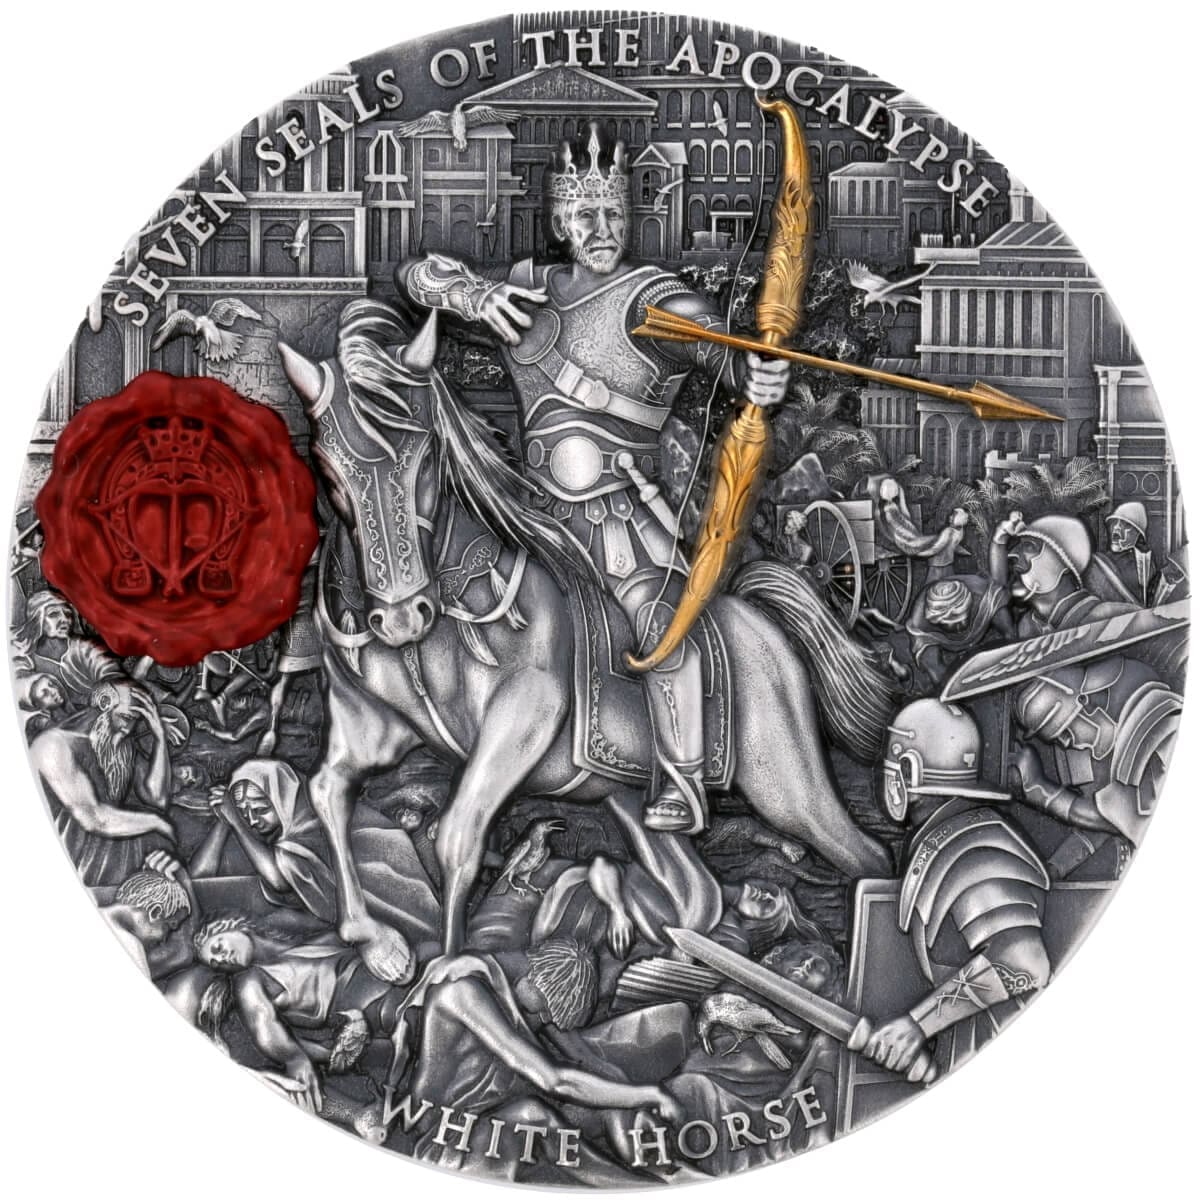 A highly detailed, 2023 Niue Seven Seals of the Apocalypse White Horse 3oz Silver Antiqued Coin depicting the White Horse, one of the four horsemen, with intricate engravings and a red wax seal.